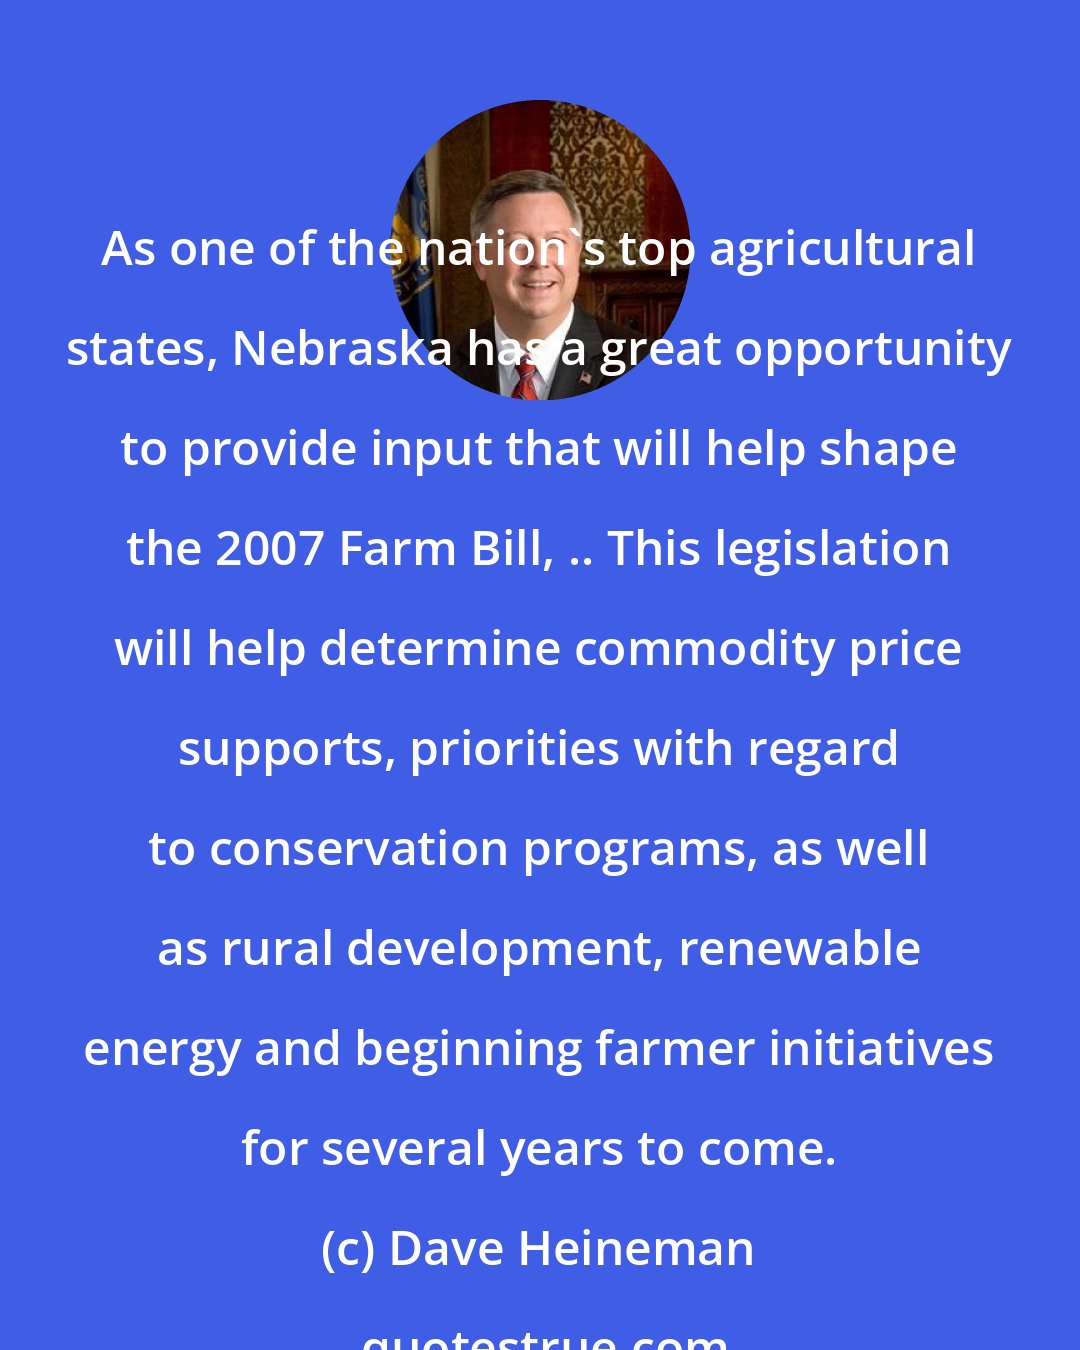 Dave Heineman: As one of the nation's top agricultural states, Nebraska has a great opportunity to provide input that will help shape the 2007 Farm Bill, .. This legislation will help determine commodity price supports, priorities with regard to conservation programs, as well as rural development, renewable energy and beginning farmer initiatives for several years to come.